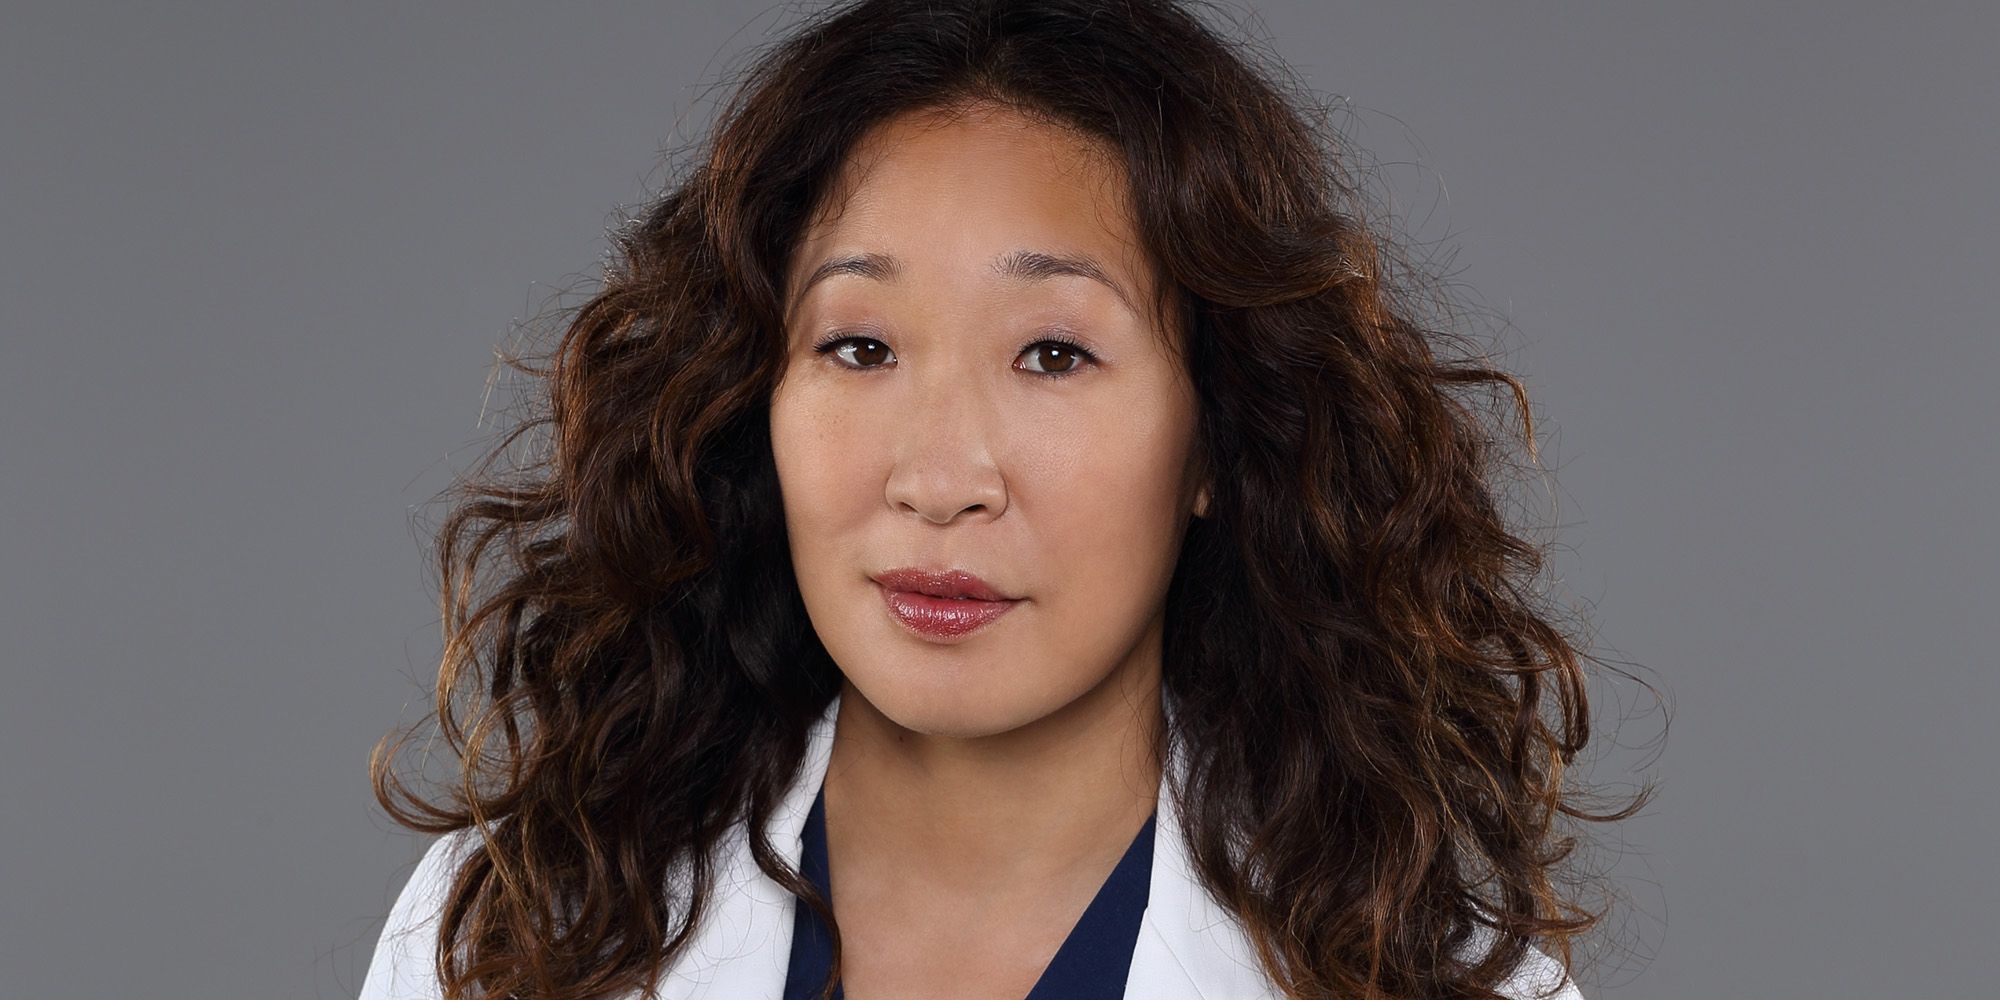 Publicity shot of Sandra Oh as Cristina Yang in her doctor outfit in Grey's Anatomy.